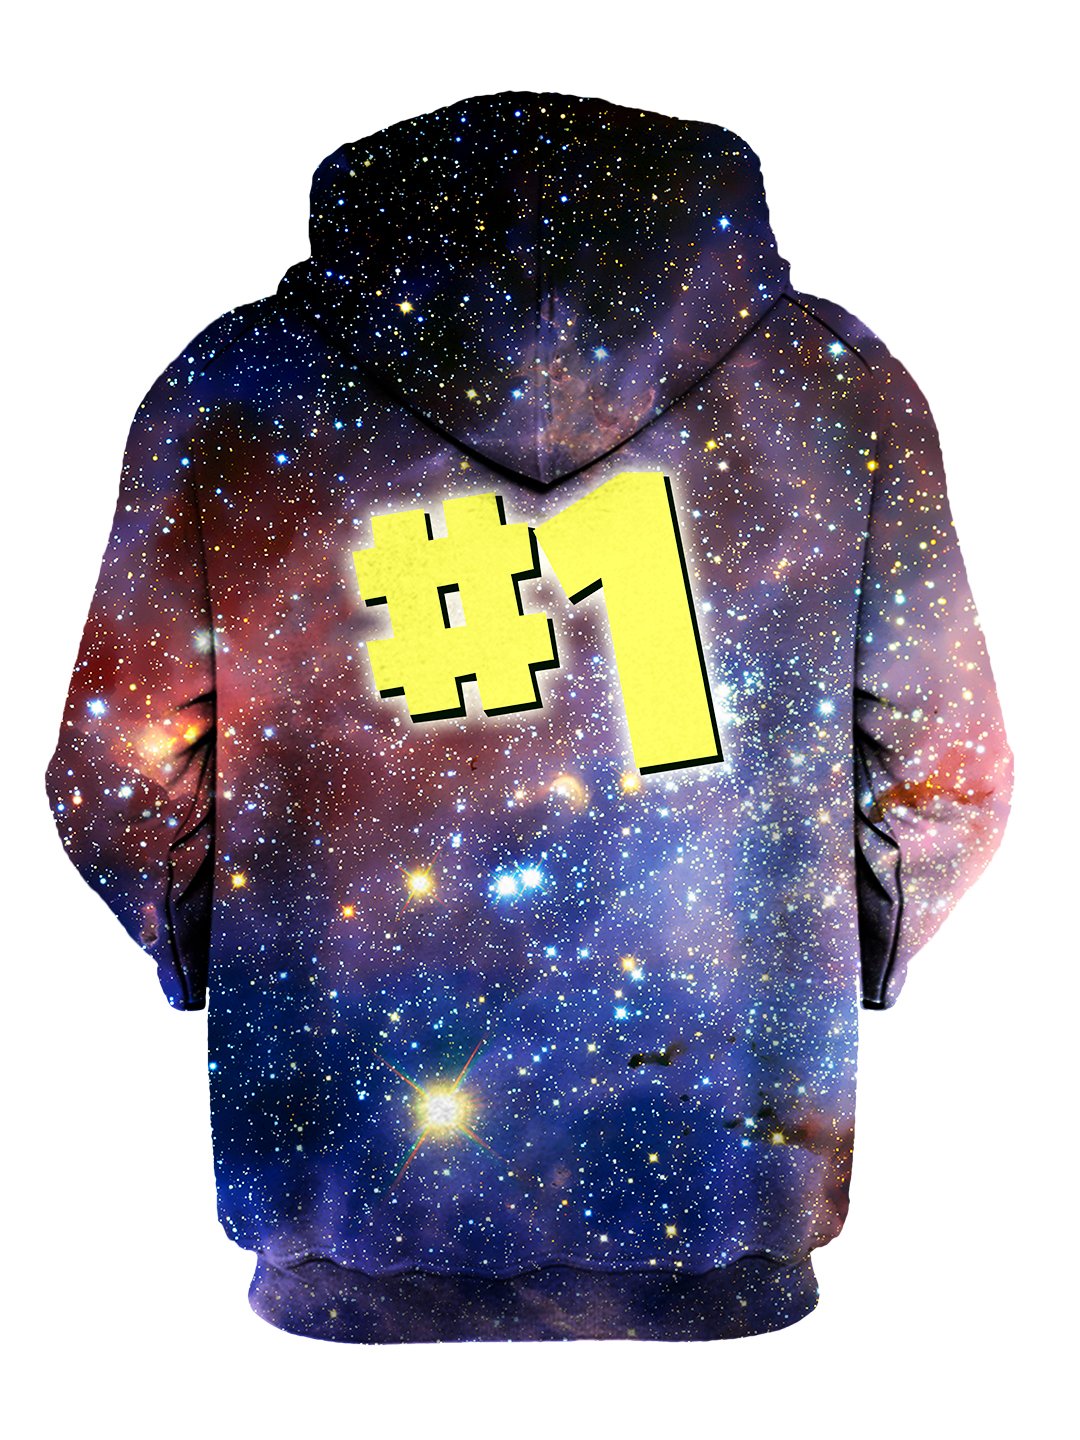 Back view of all over print number one galaxy hoody by Gratefully Dyed Apparel. 